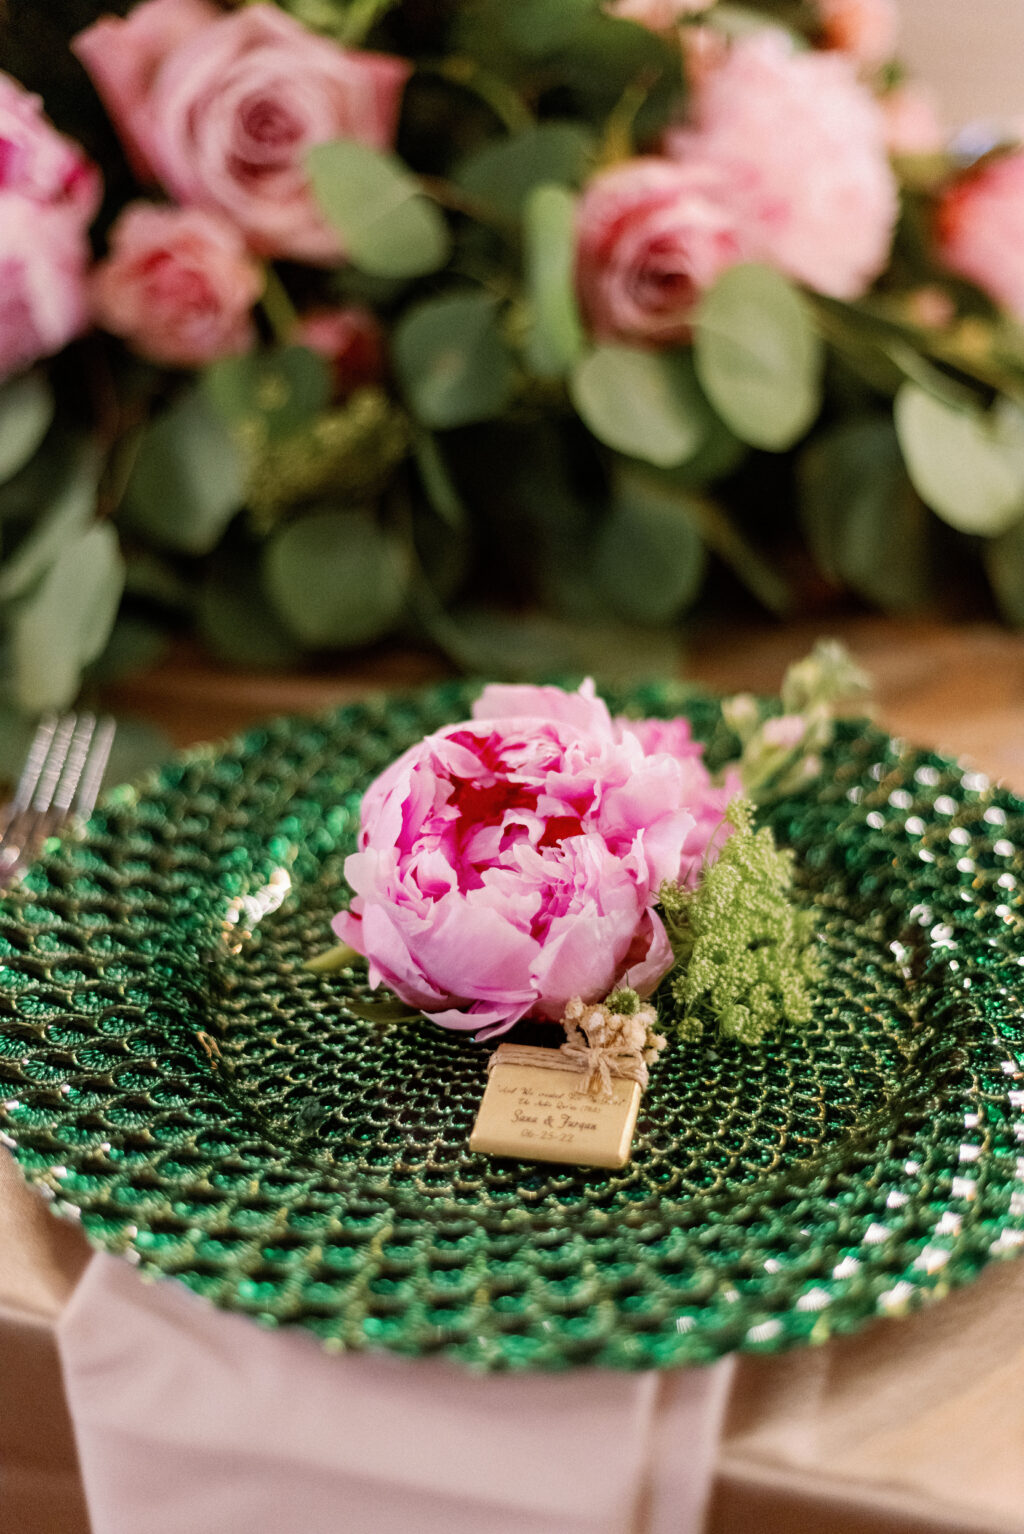 Emerald Green Pineapple Textured Chargers with Pink Garden Rose | Indian Wedding Reception Table Decor Inspiration